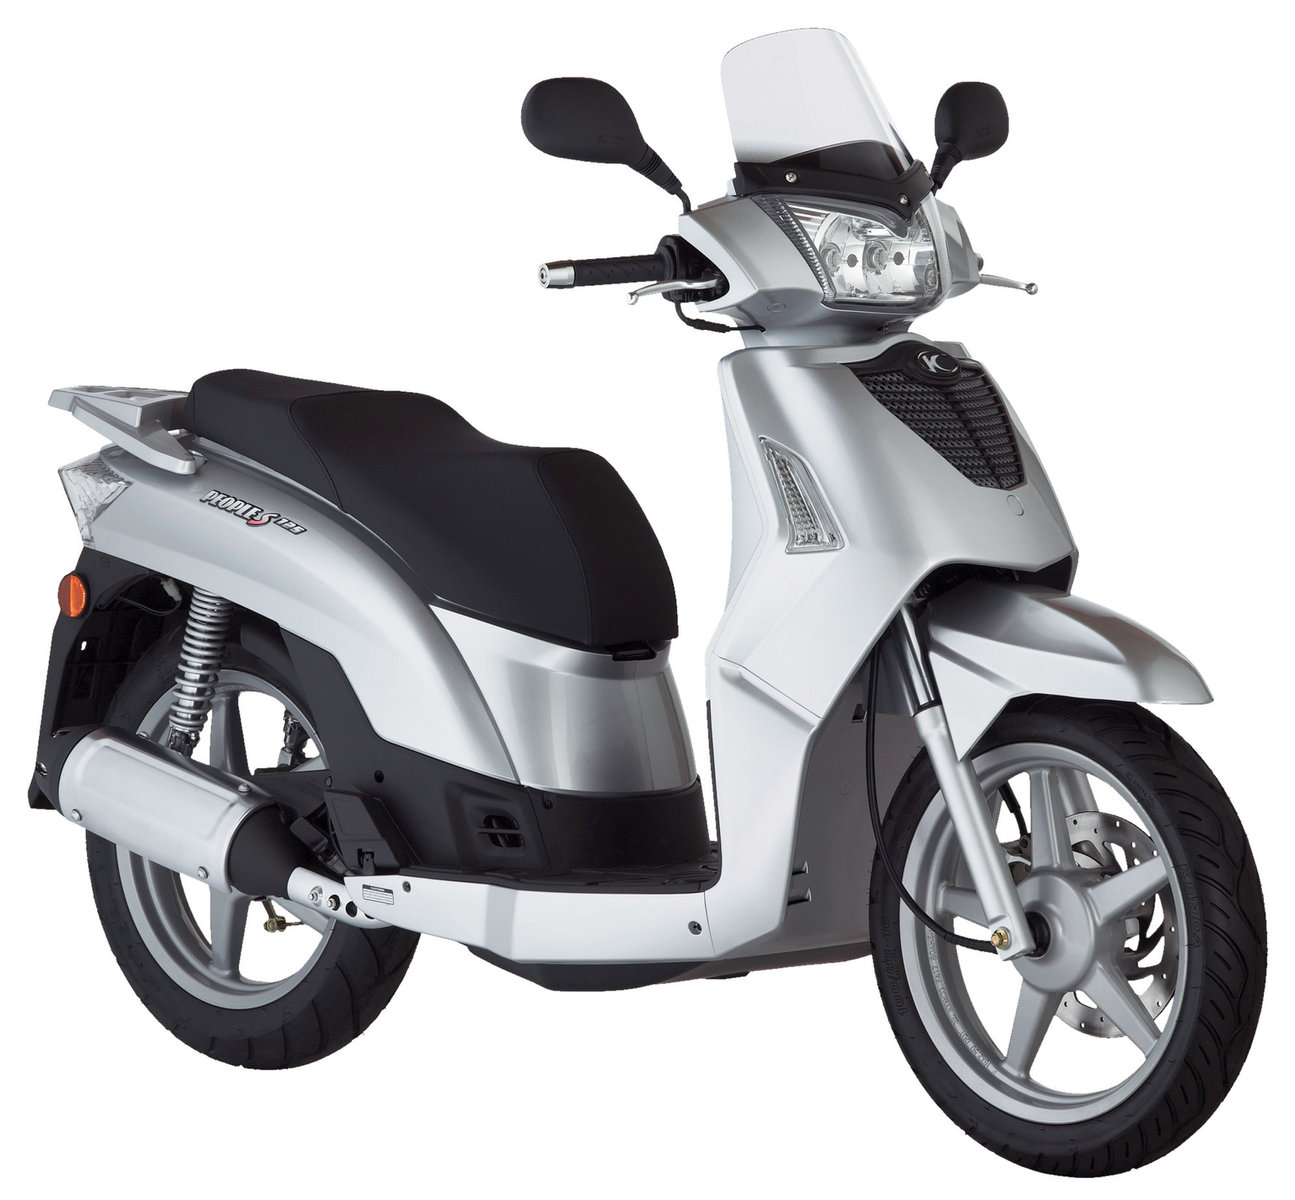 KYMCO PEOPLE 125 PARTS